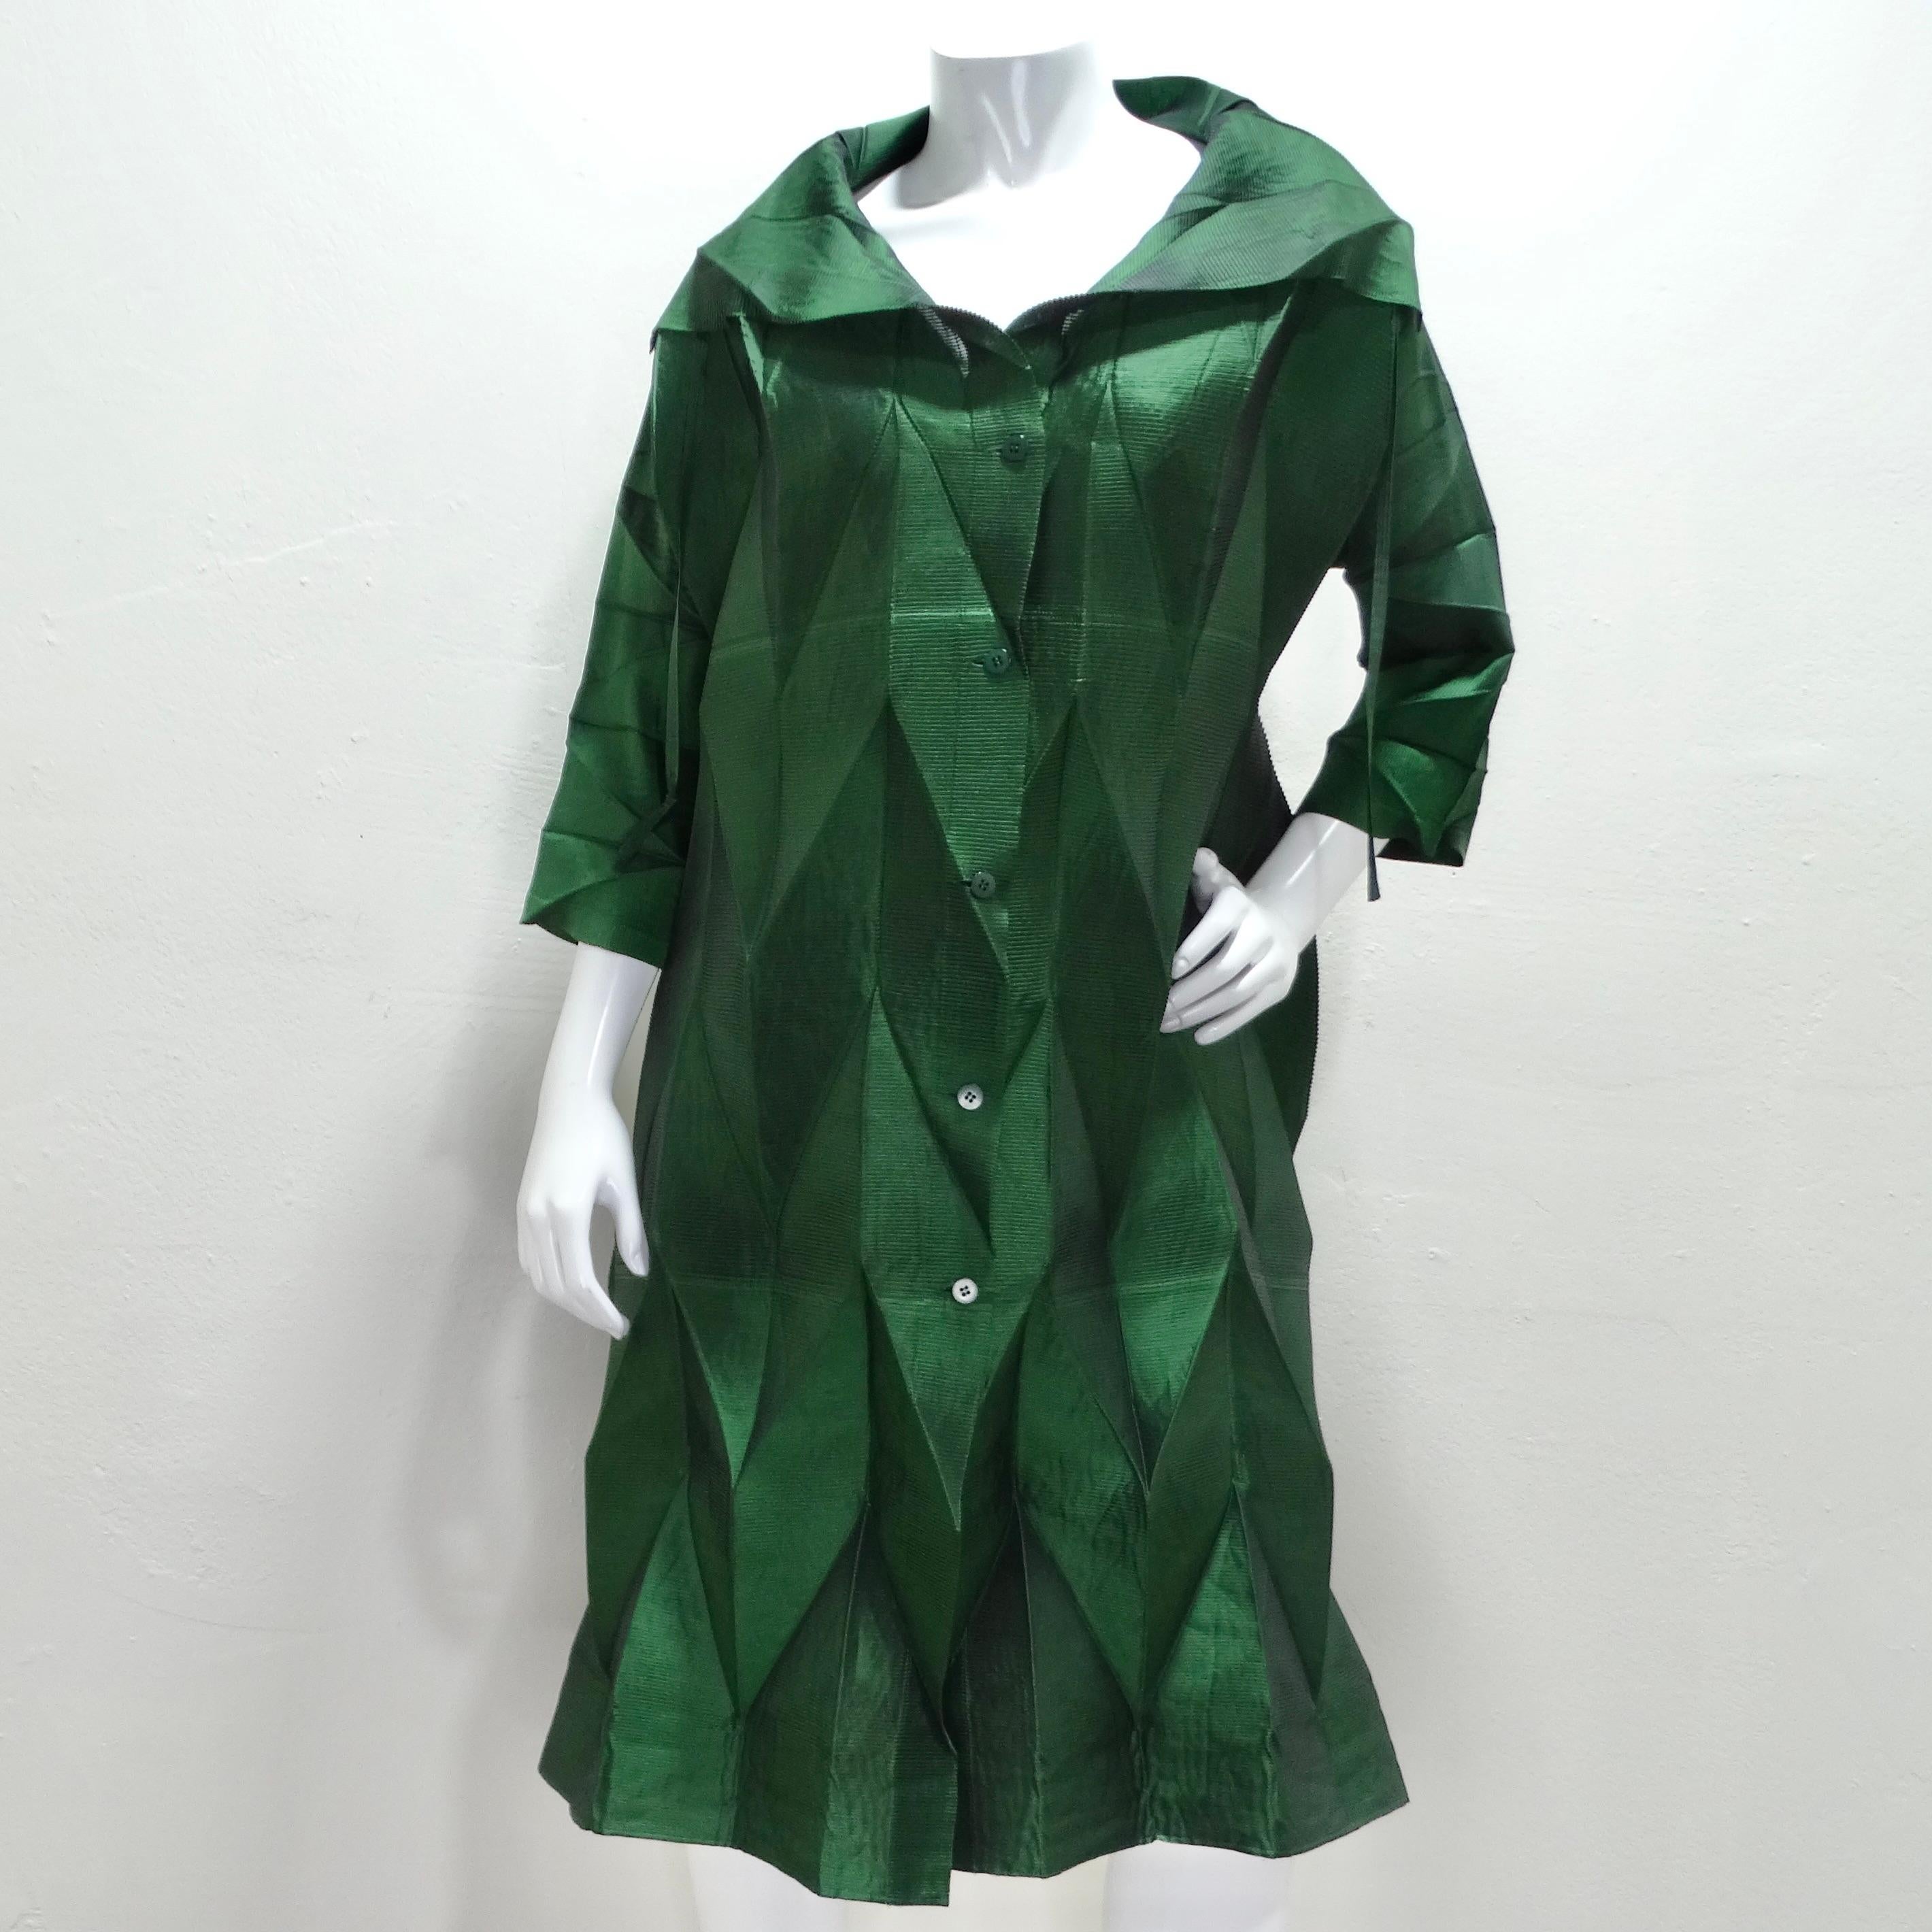 The Issey Miyake Spring 2008 Runway Green Pleated Dress is a striking and innovative piece that embodies the designer's expertise in pleating and textile manipulation. The emerald green color gives this dress a vibrant and luxurious appearance,